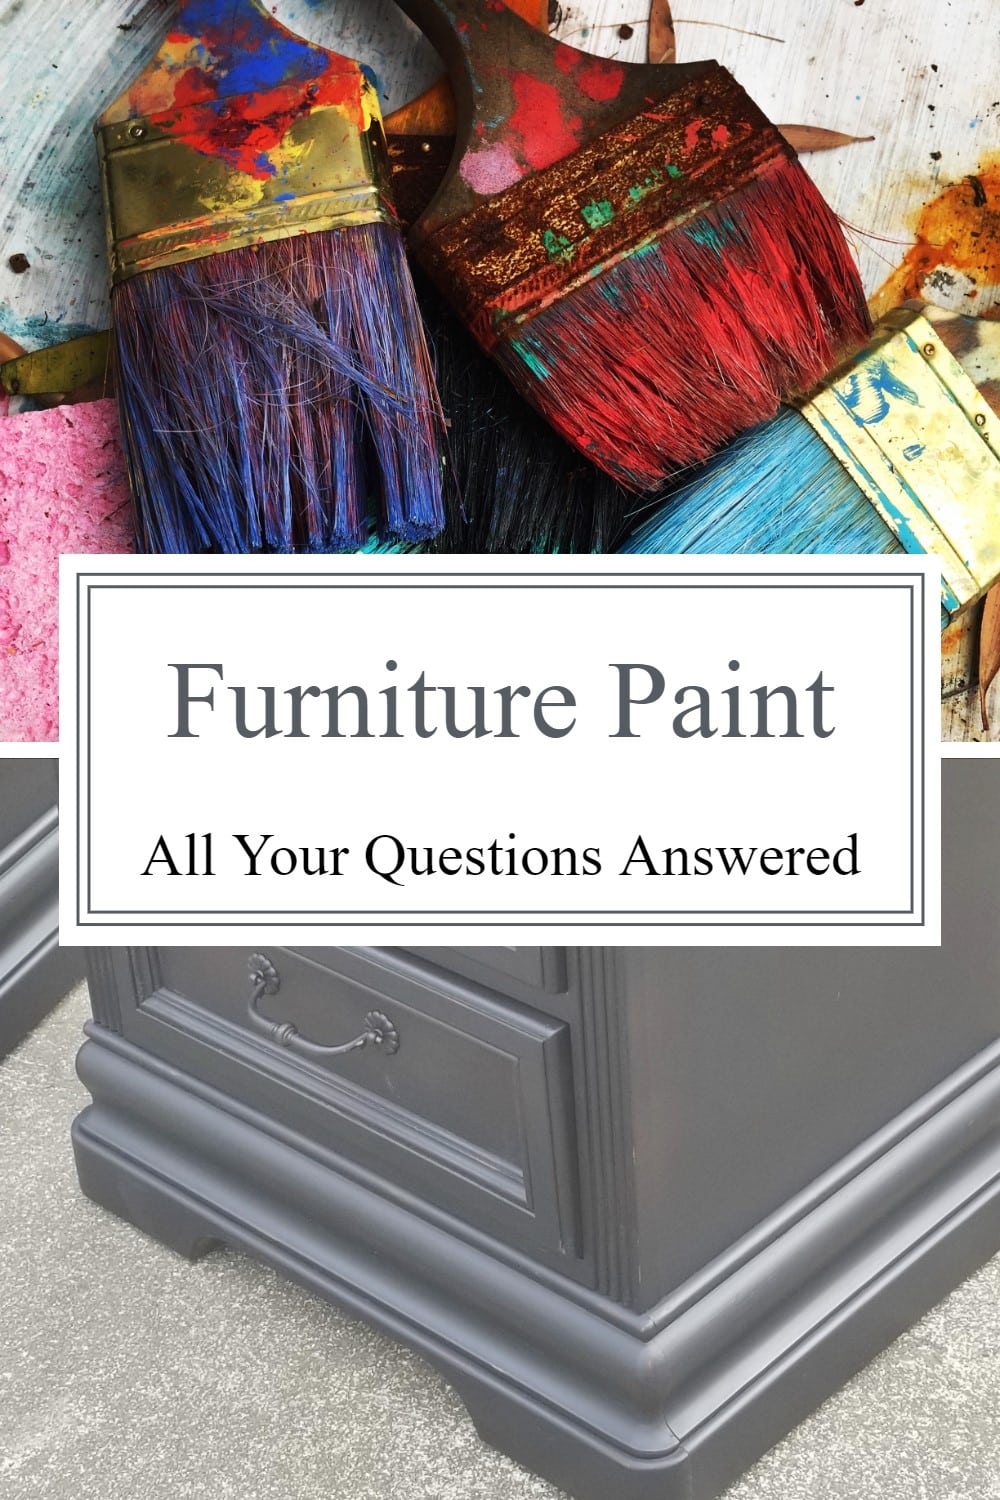 Furniture paint tips for your next hand-me-down project. Do you have a "new to you" dresser you want to update? All of your questions answered. via @repurposedlife